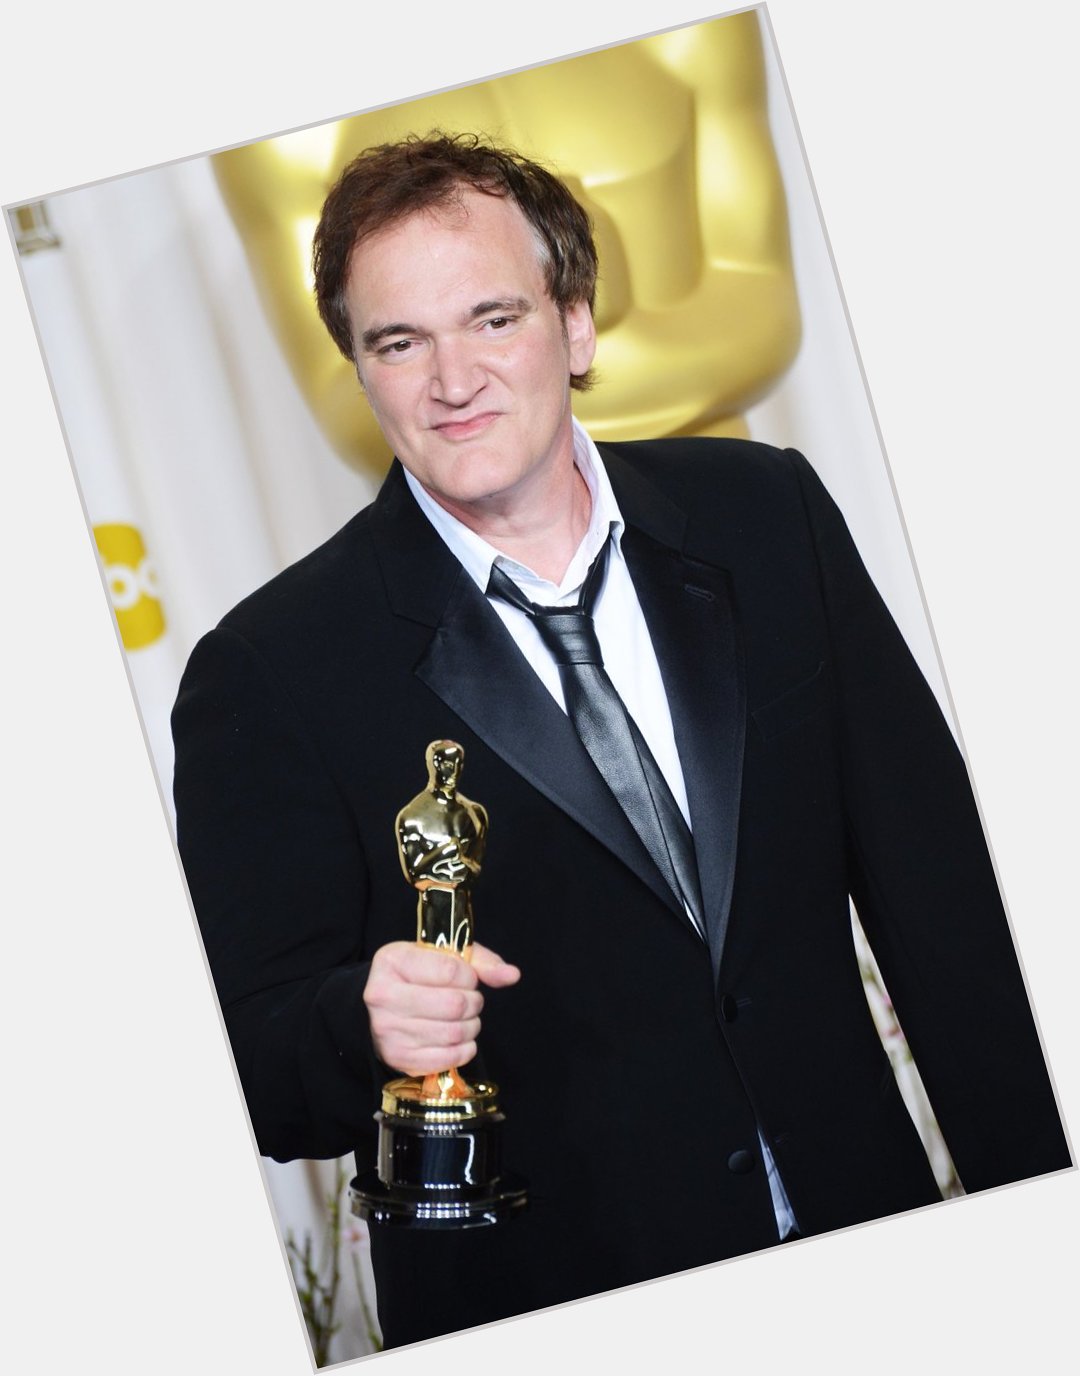 Happy birthday to Quentin Tarantino! What are some of your fave films by him? 